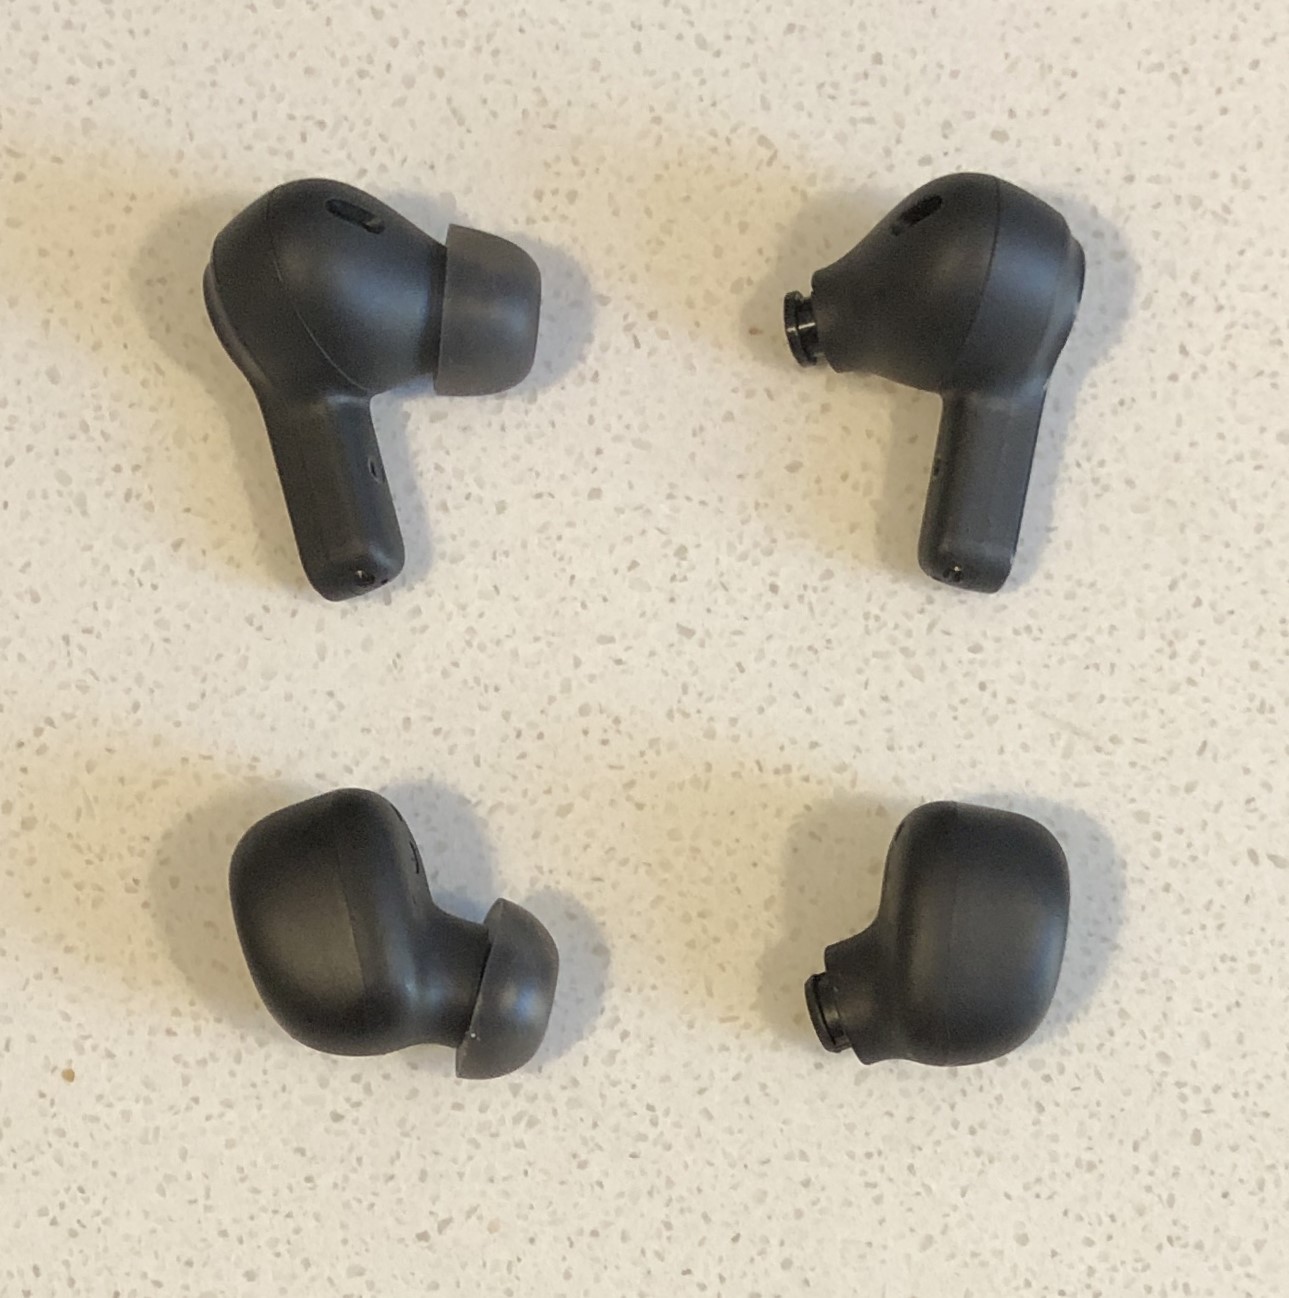 JBL Vibe Beam vs Vibe buds earbud tip and nozzle